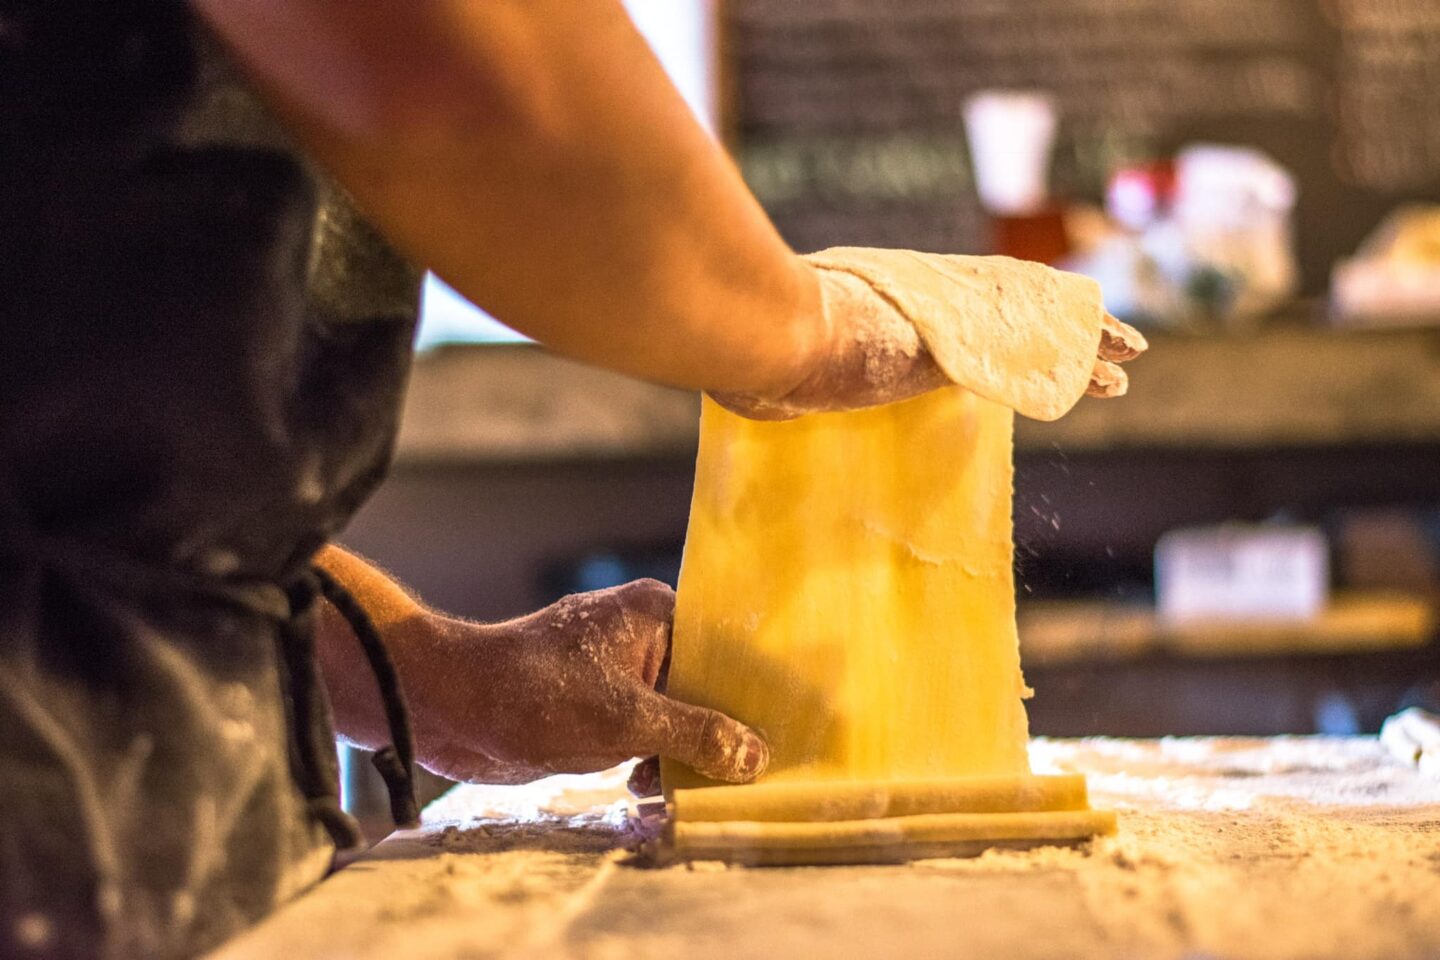 Hands rolling out fresh pasta at Mangia Mi in Calistoga, CA